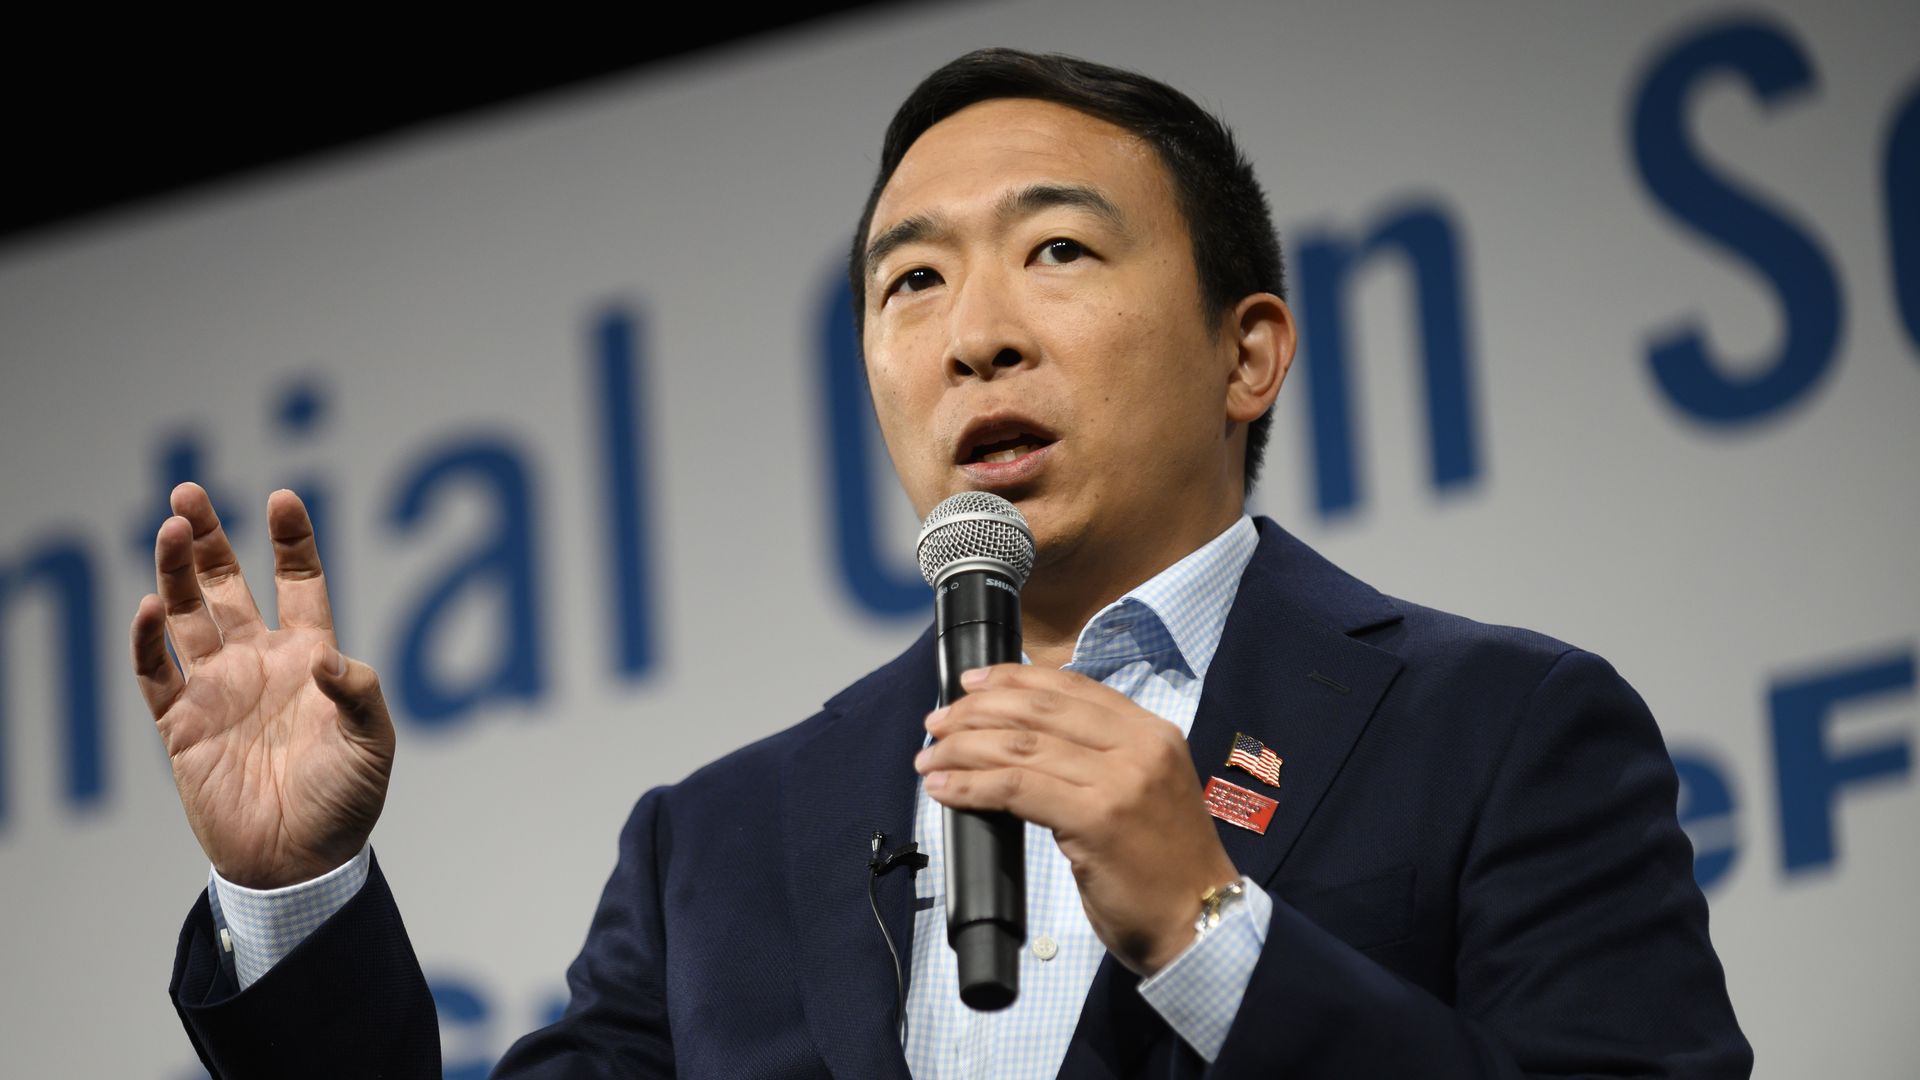  Democratic presidential candidate Andrew Yang speaks during a forum on gun safety at the Iowa Events Center on August 10